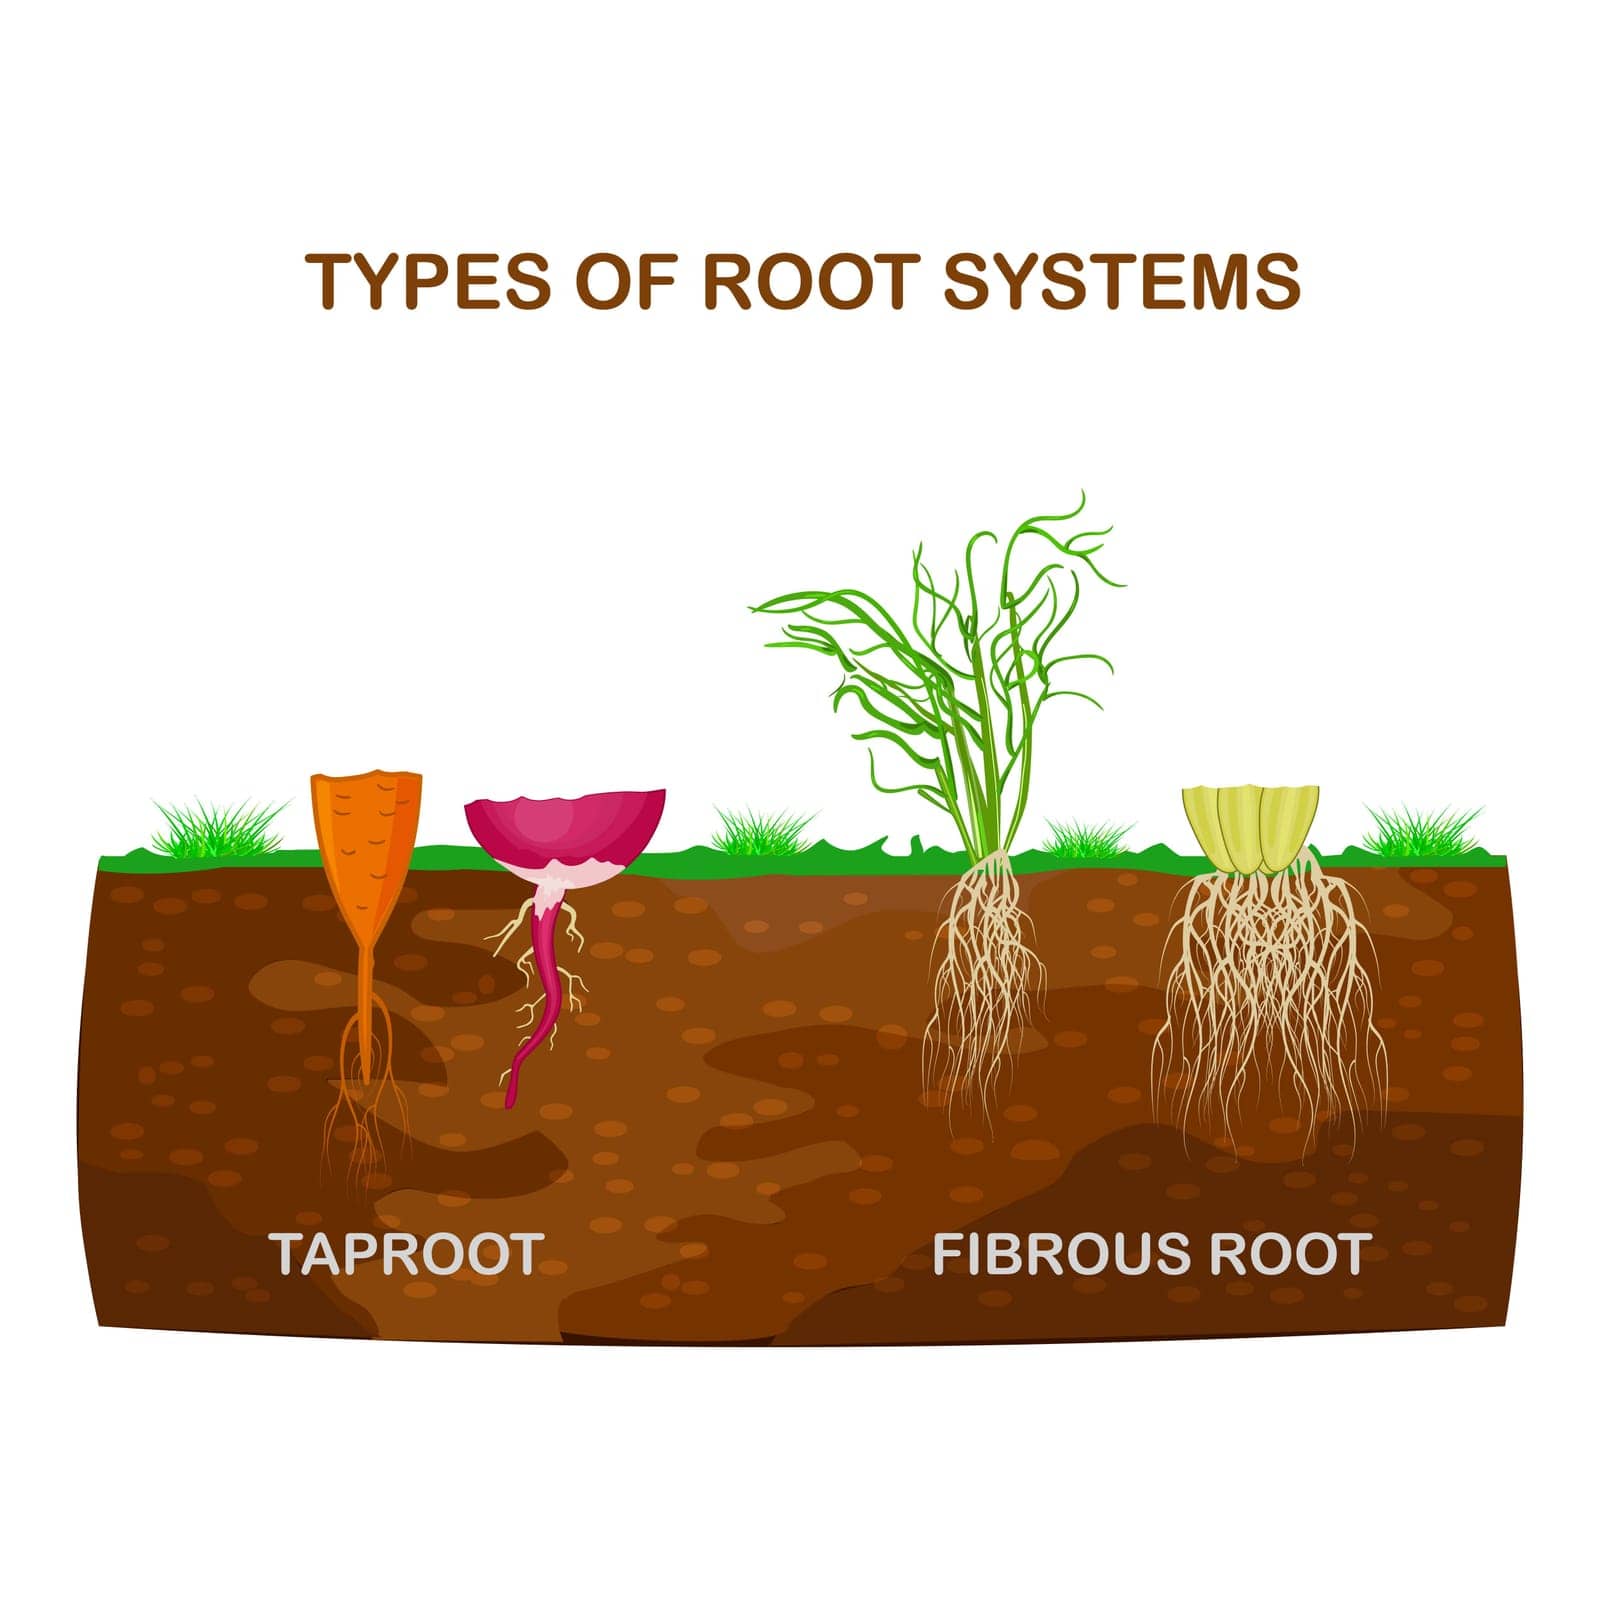 Types of root systems of plants, monocots and dicots in soil in cut. Taproot and fibrous root example comparison. by KajaNi